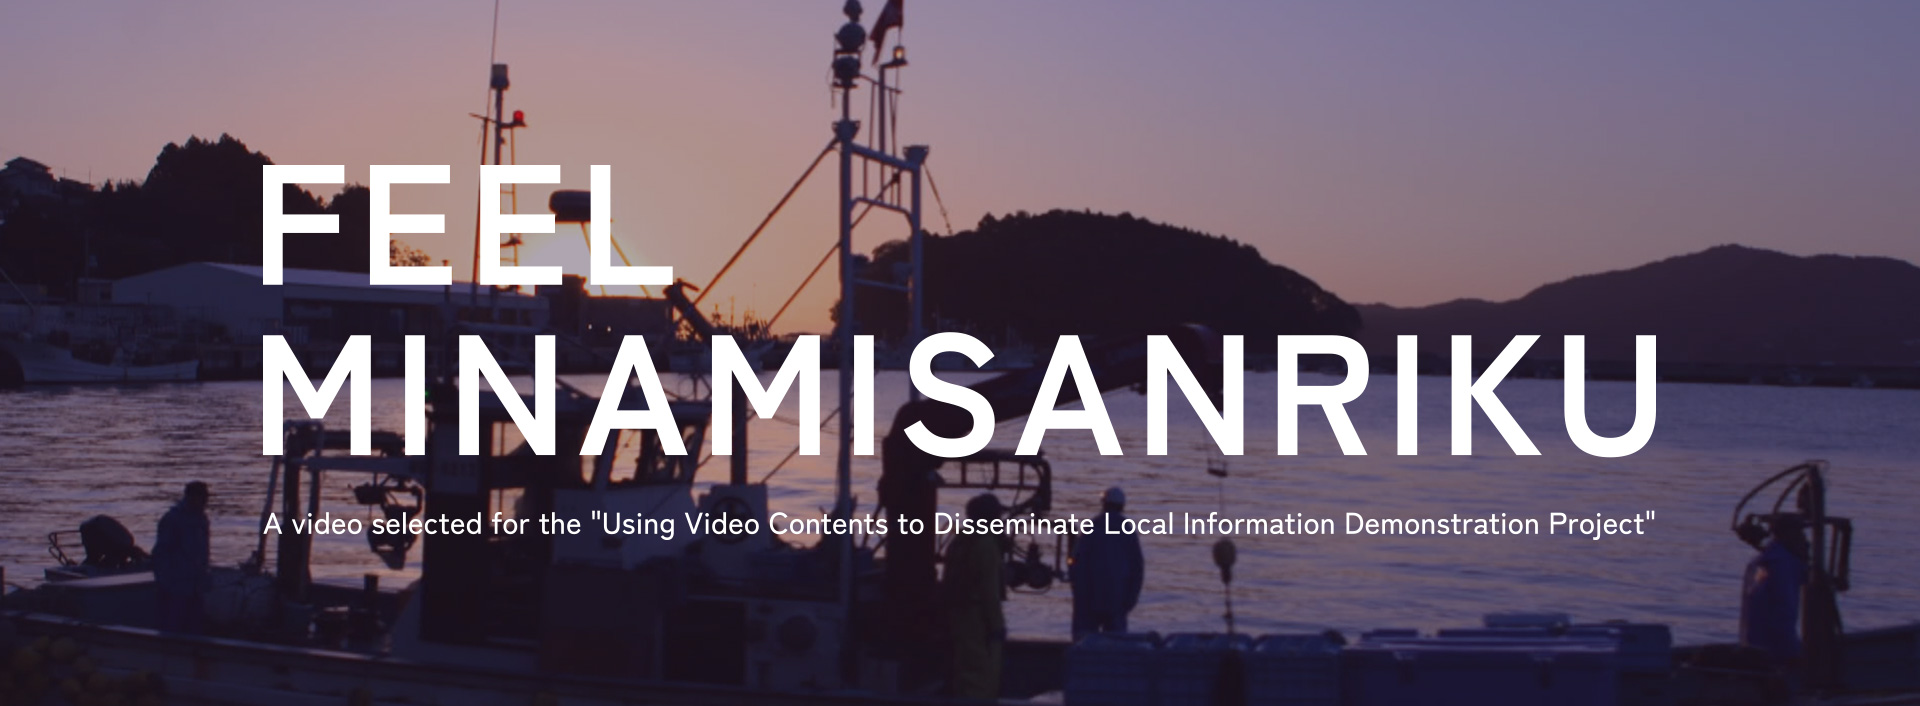 Feel Minamisanriku (A video selected for the Using Video Contents to Disseminate Local Information Demonstration Project)